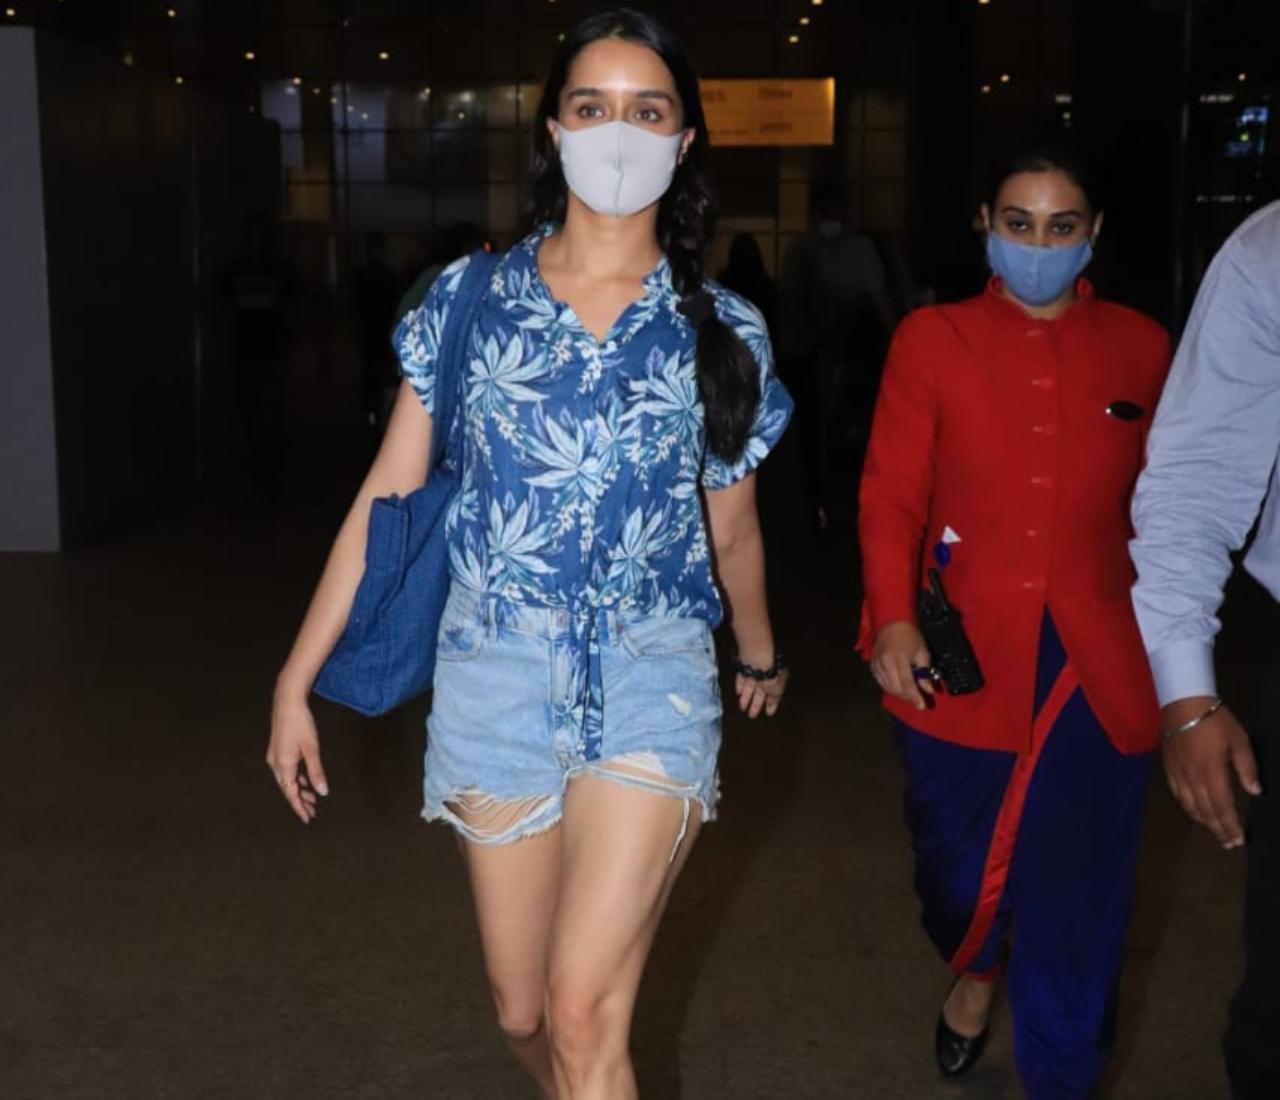 Shraddha Kapoor seemed to be in a bit of a hurry as she was snapped at the Mumbai Airport. The actress, who will be seen romancing Ranbir Kapoor in Luv Ranjan's as-yet-untitled project opted for a blue printed top and denim. (All pictures: Yogen Shah).